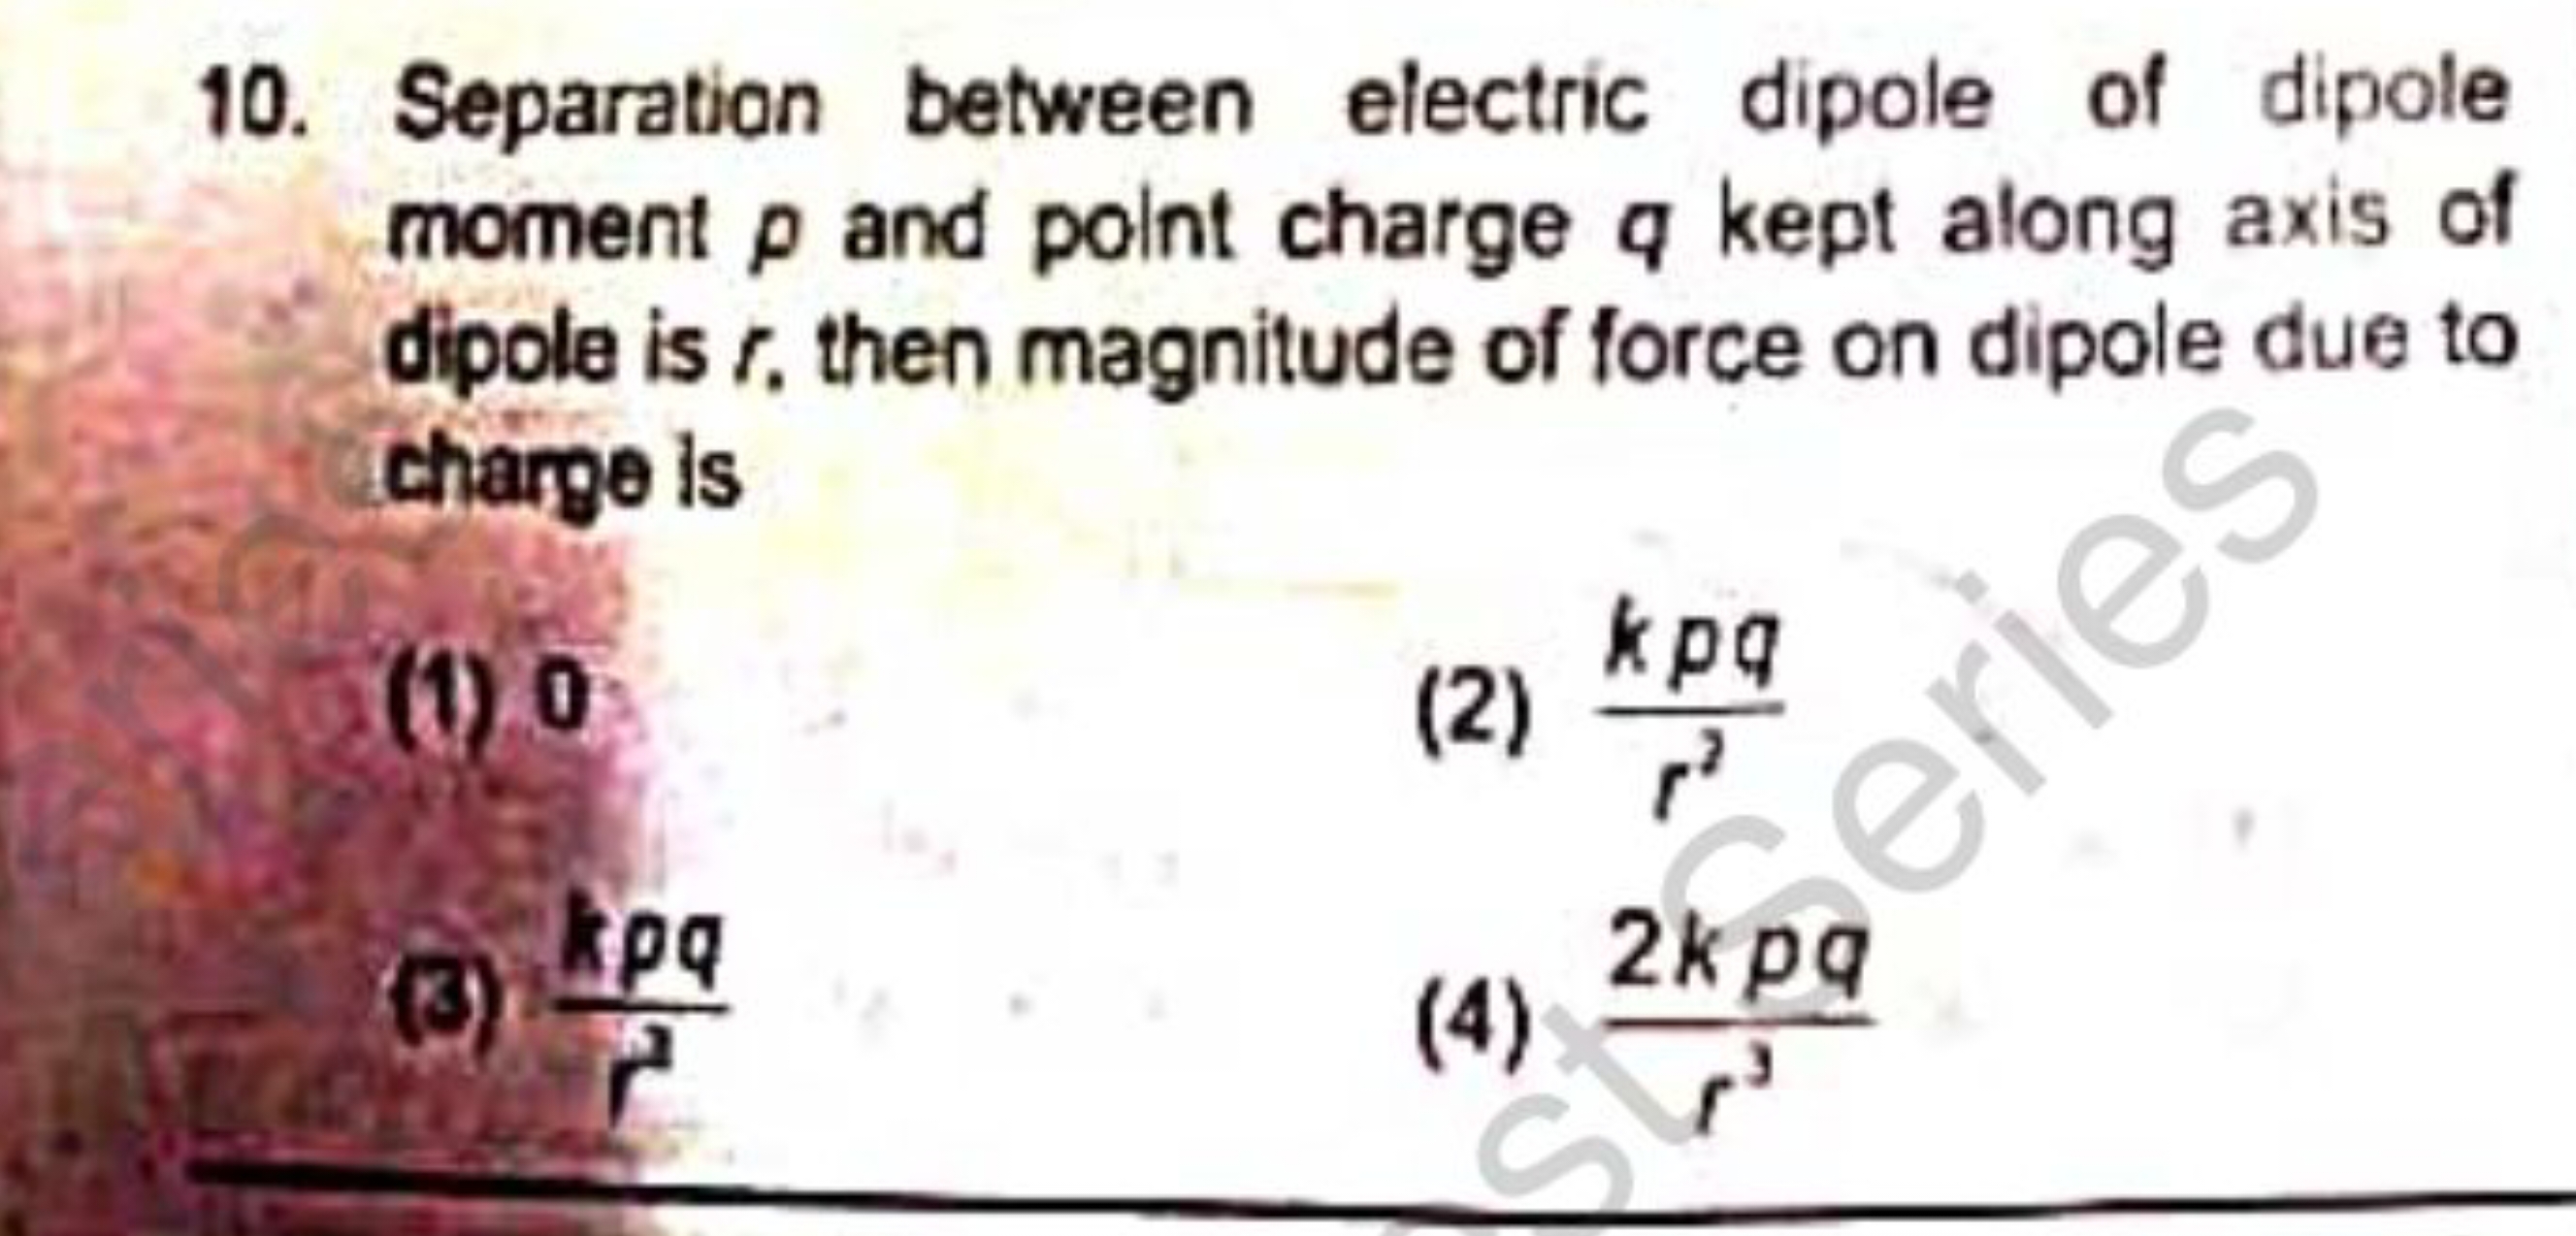 Separation between electric dipole of dipole moment p and point charge